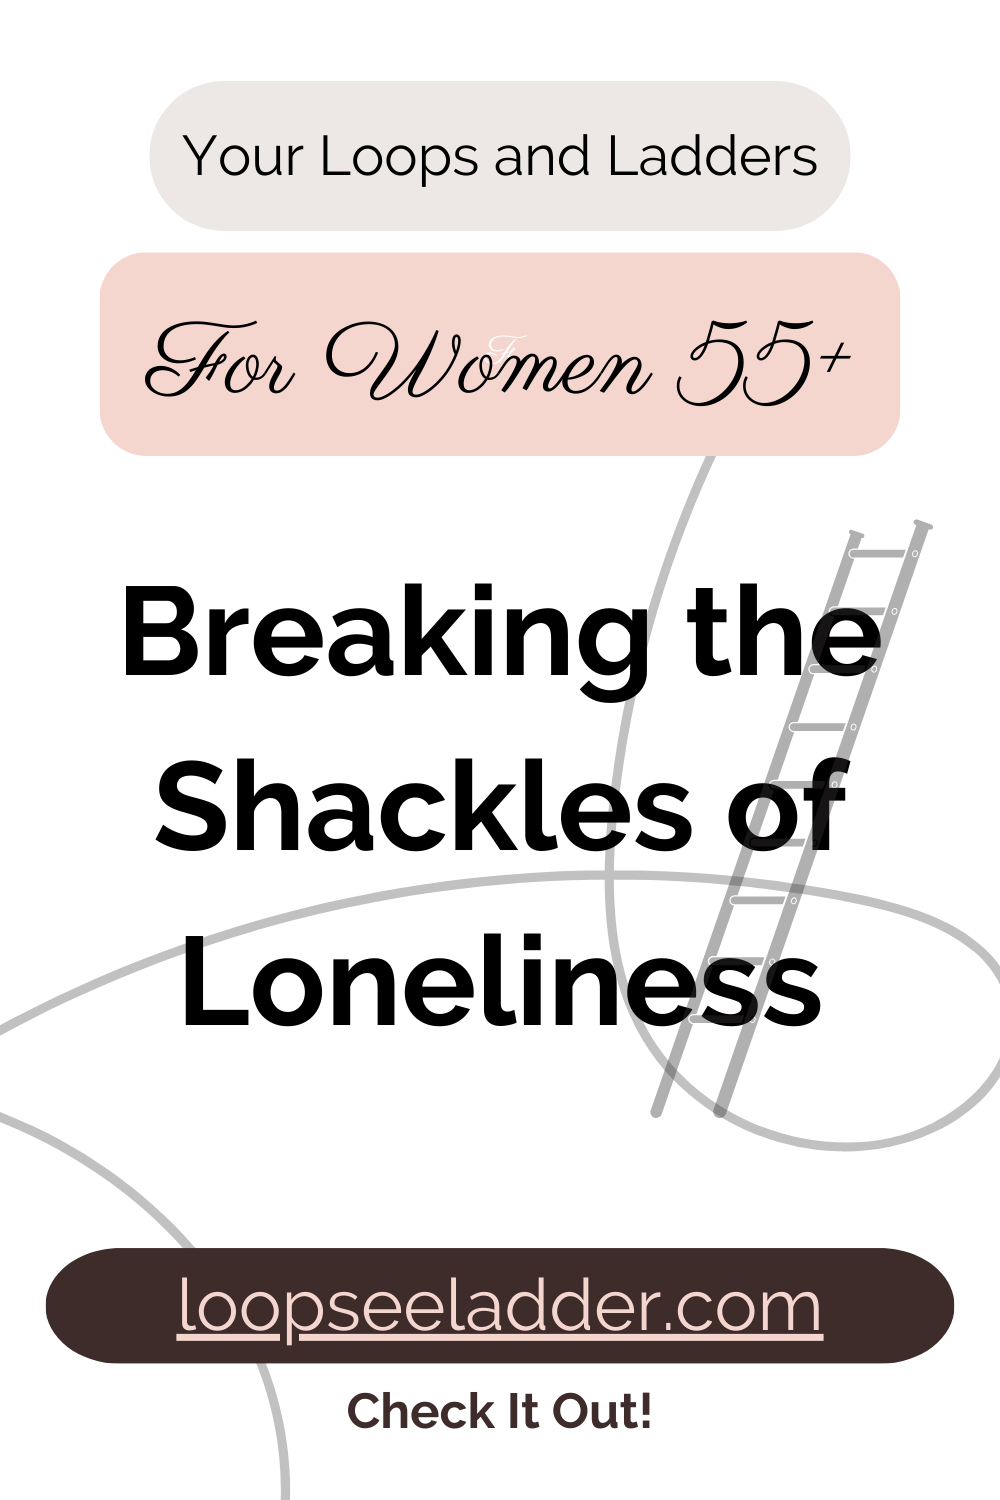 Breaking the Shackles of Loneliness: Innovative Strategies for Women 55+